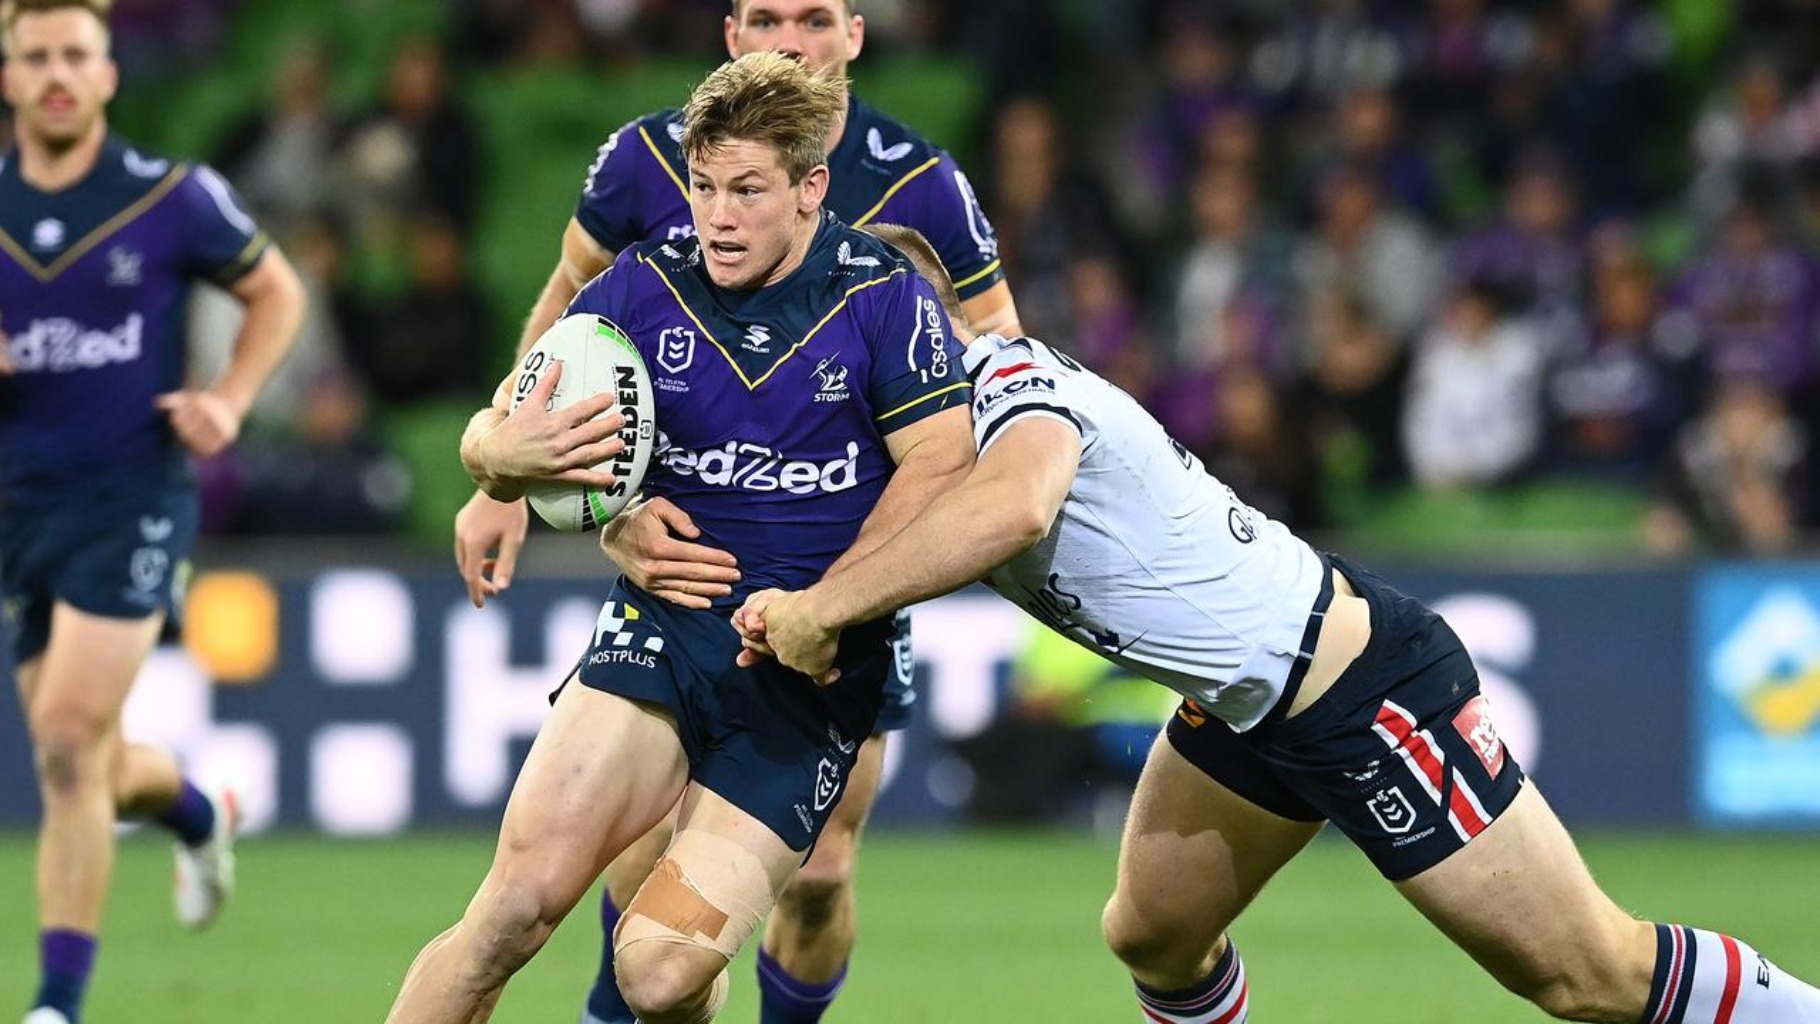 Harry Grant during the Game for Melbourne Storm.